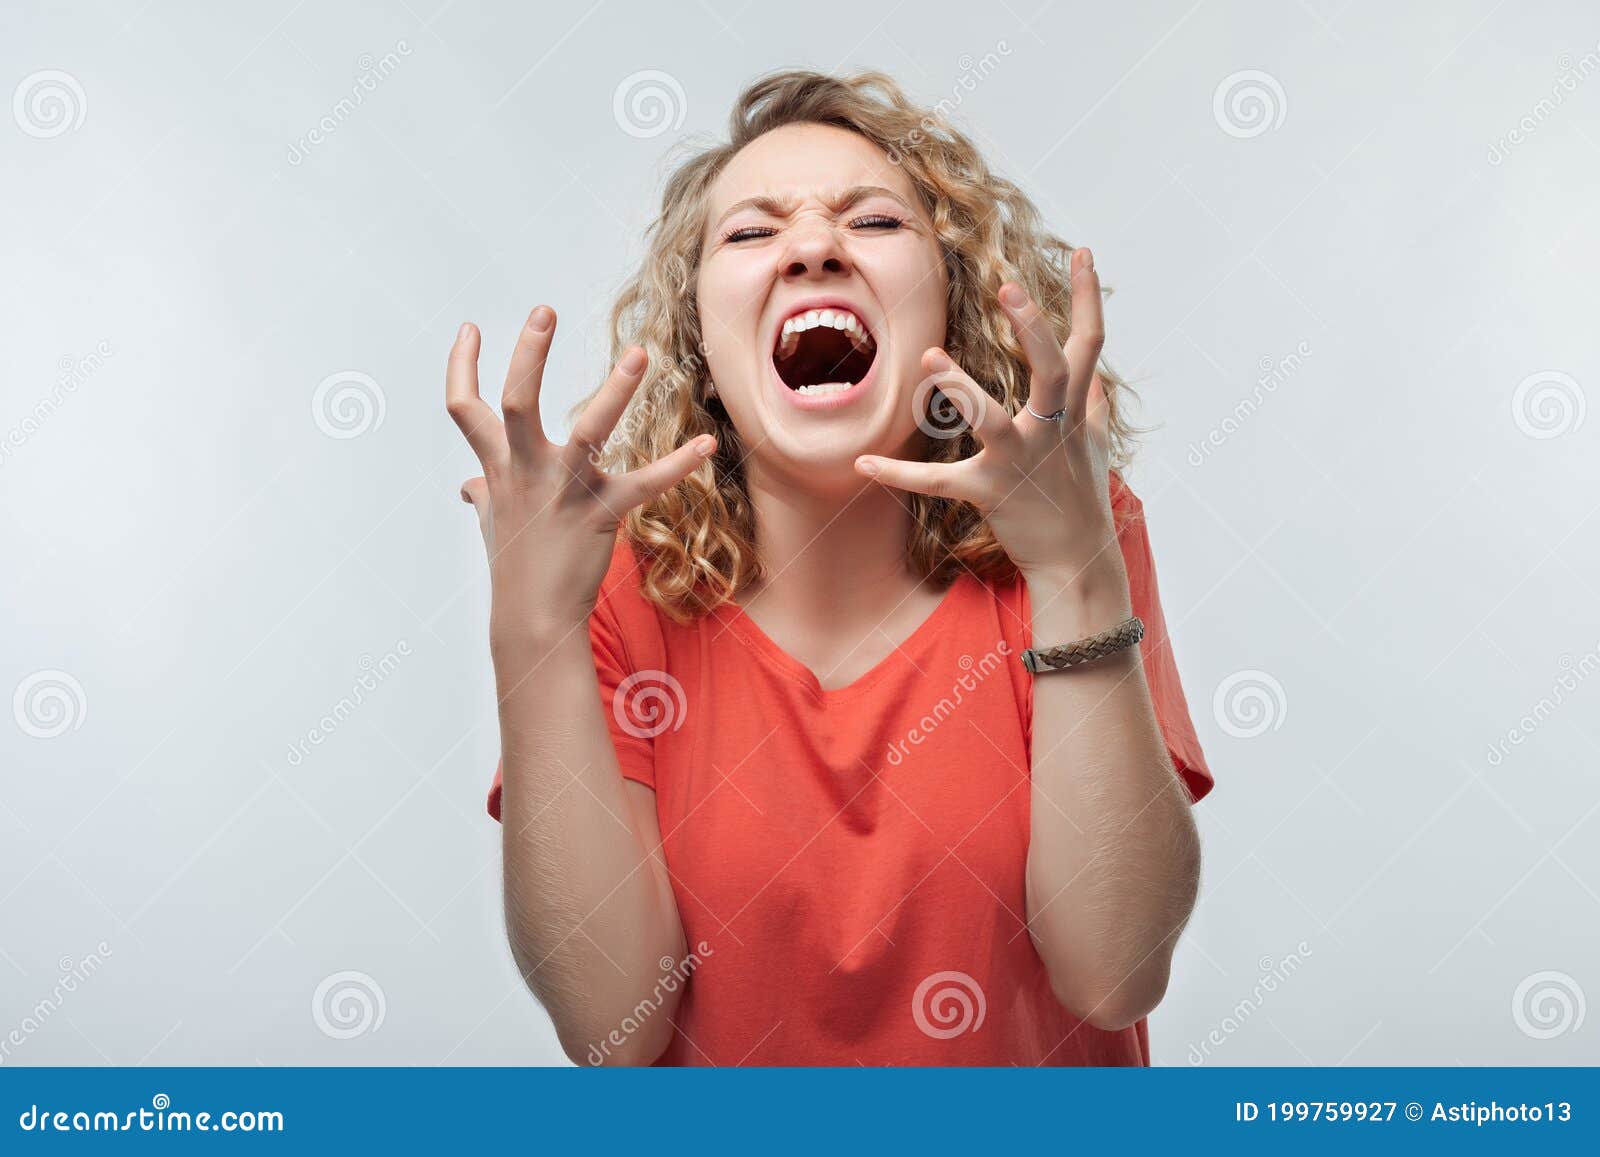 Angry Blonde Woman Screaming And Raising Hands In Anger Negative